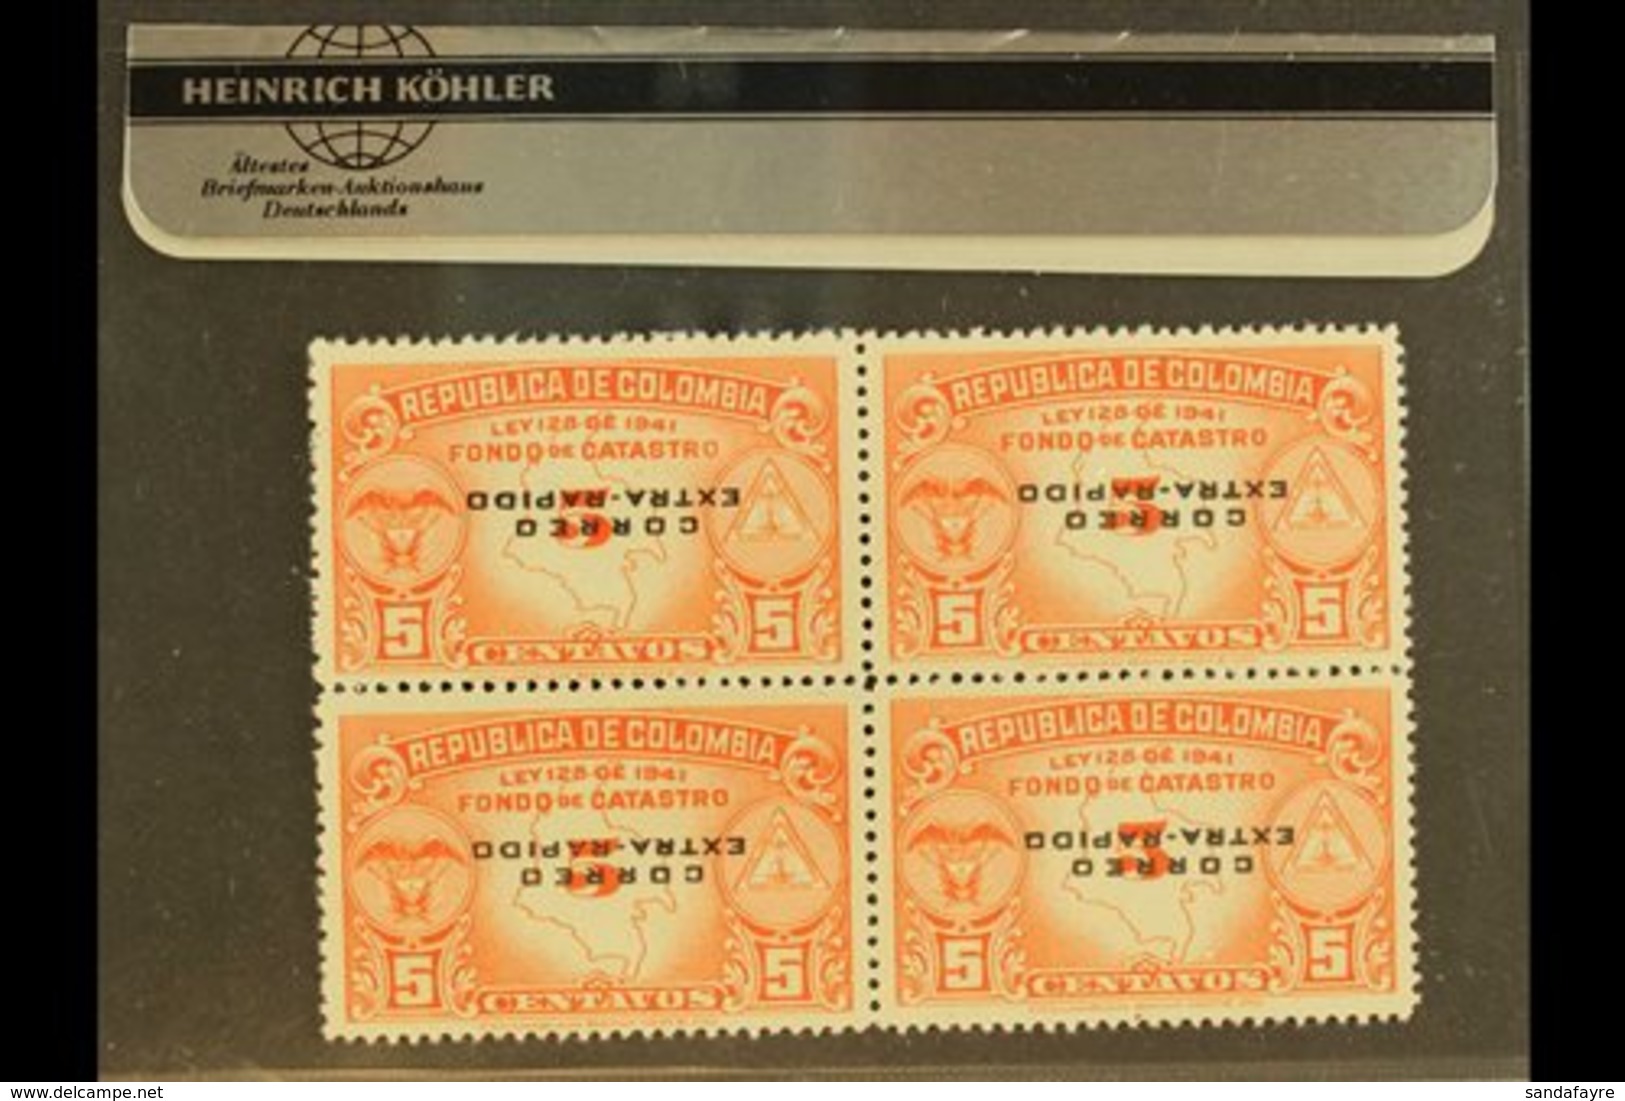 1953 AIR OVERPRINT VARIETIES 5c Air Orange-red Real Estate Tax Stamp With "CORREO / EXTRA-RAPIDO" Overprints, A Superb N - Colombia